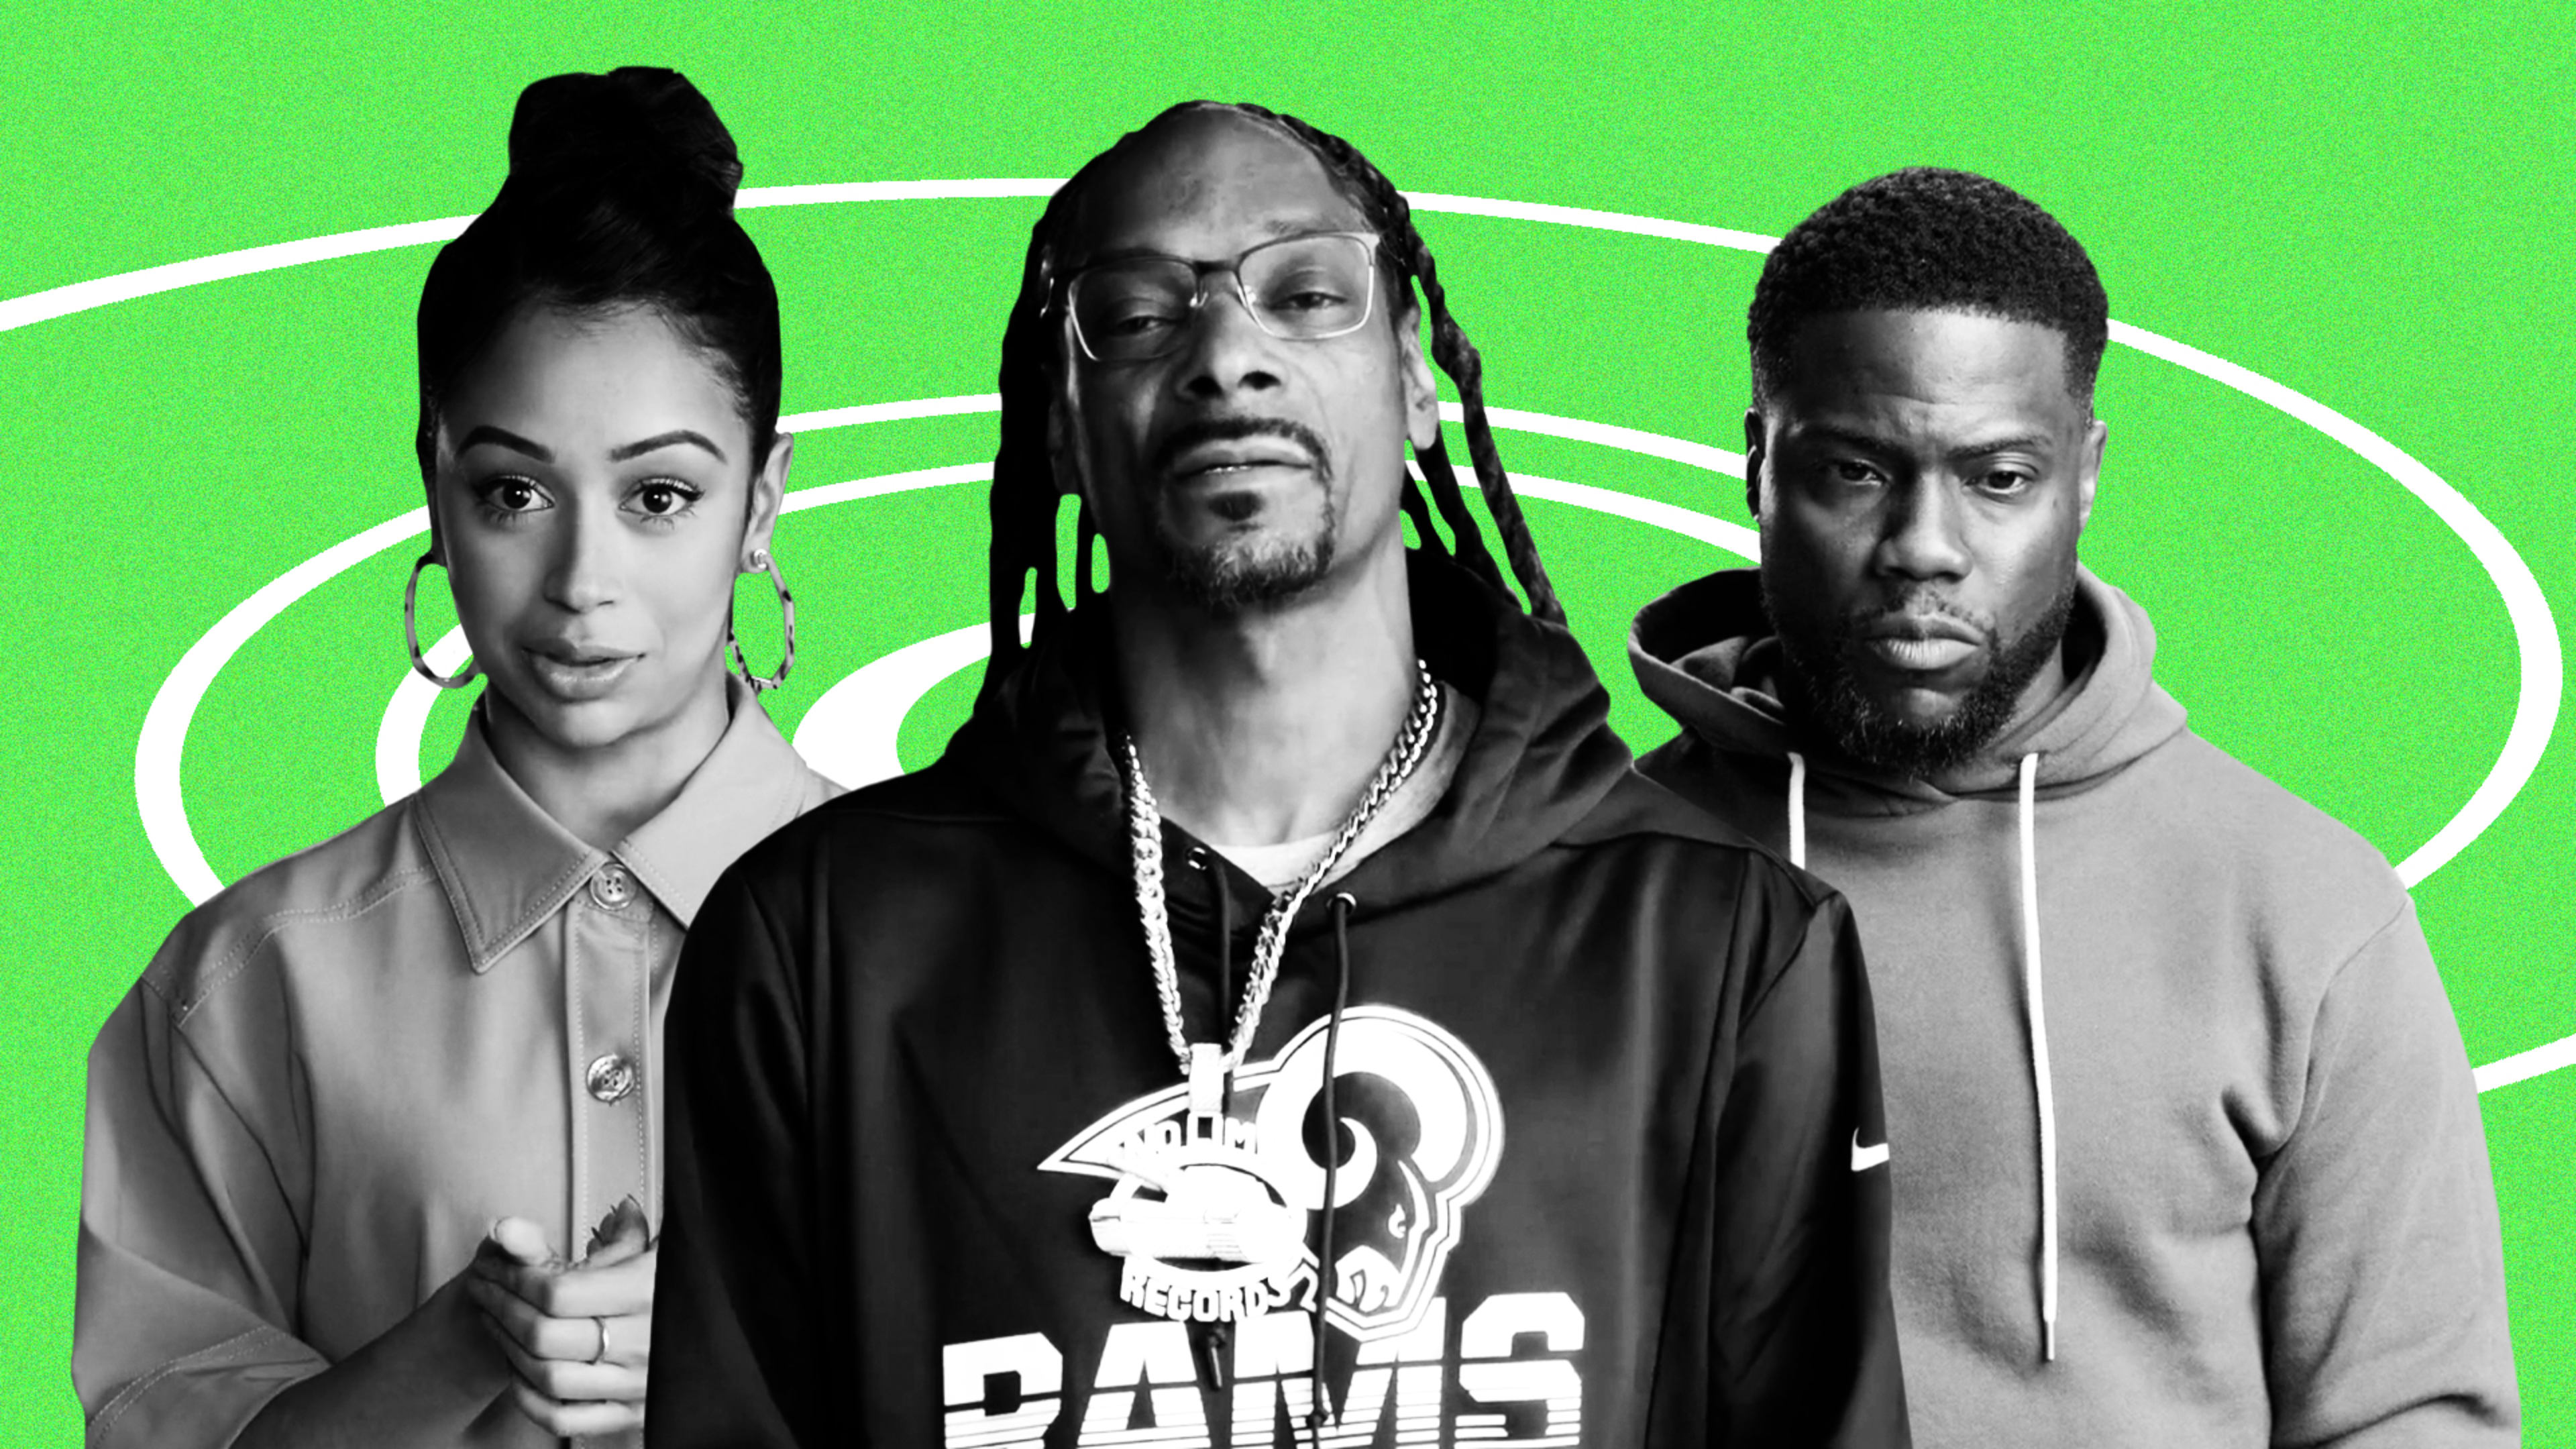 Beyond Meat uses Kevin Hart, Liza Koshy, and Snoop to show there’s no one way to eat less meat